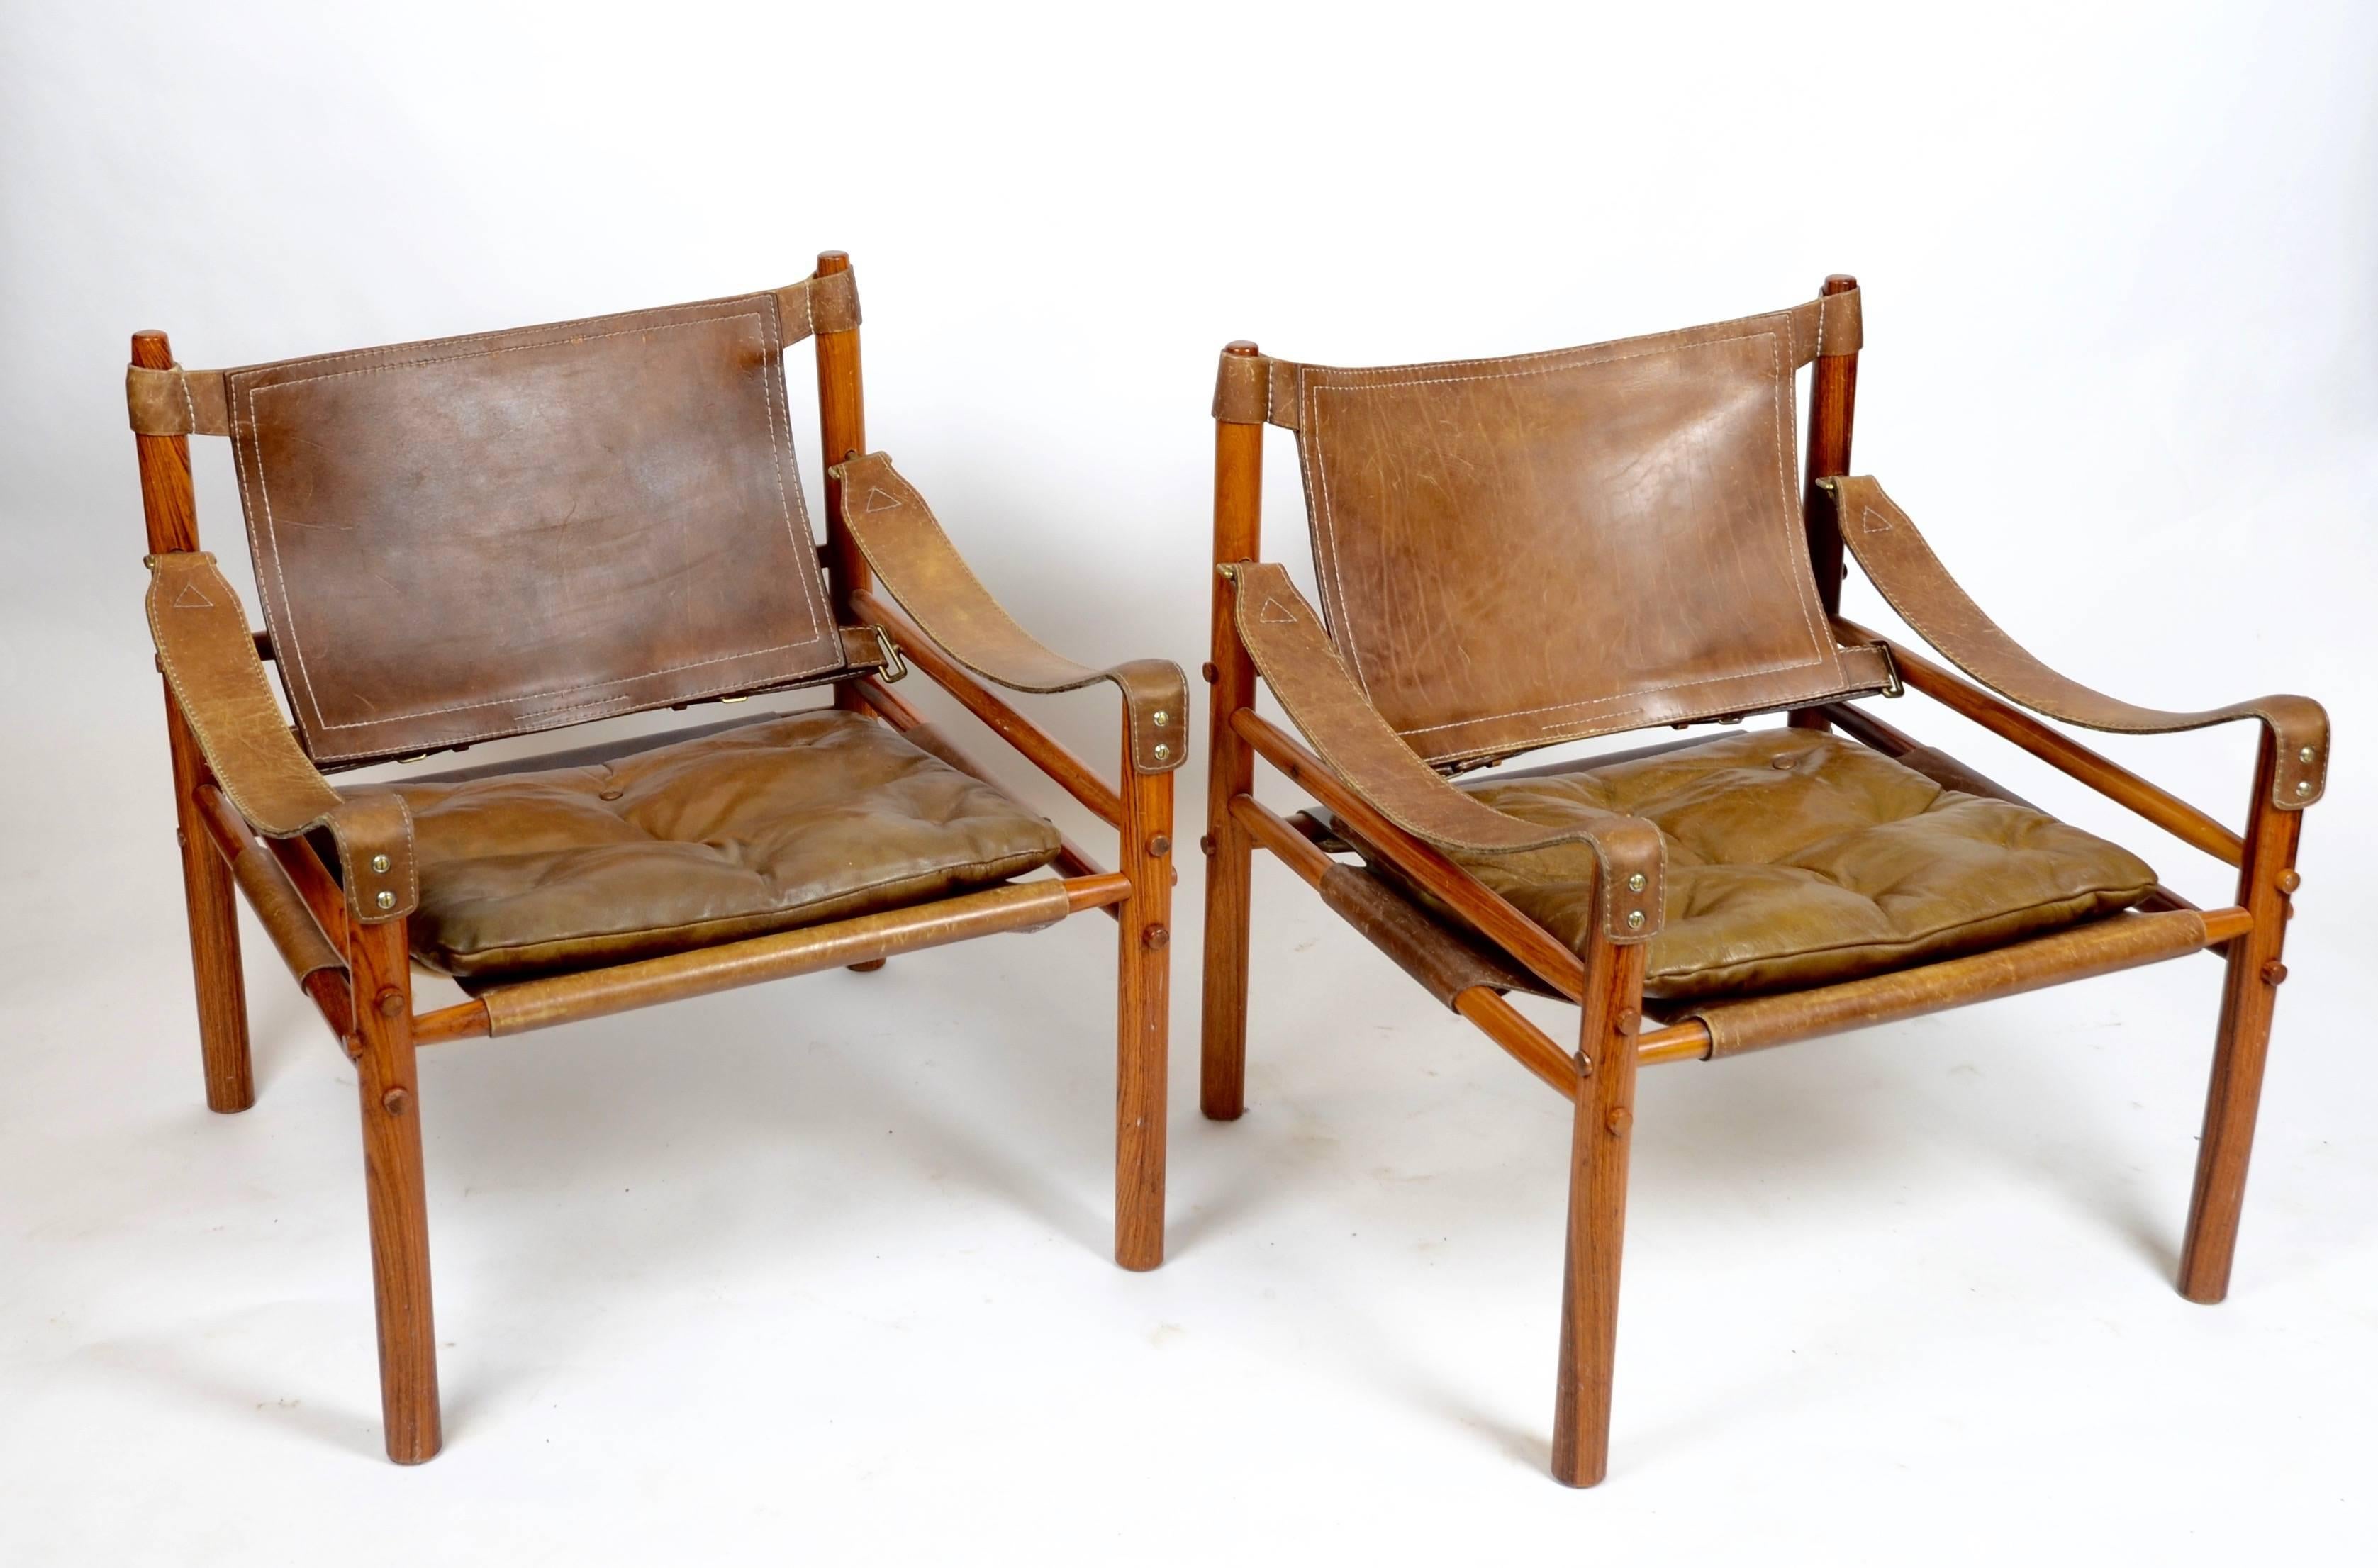 A pair of safari chairs, model Sirocco in rosewood and leather. Designed by Arne Norell, Sweden, 1960s.